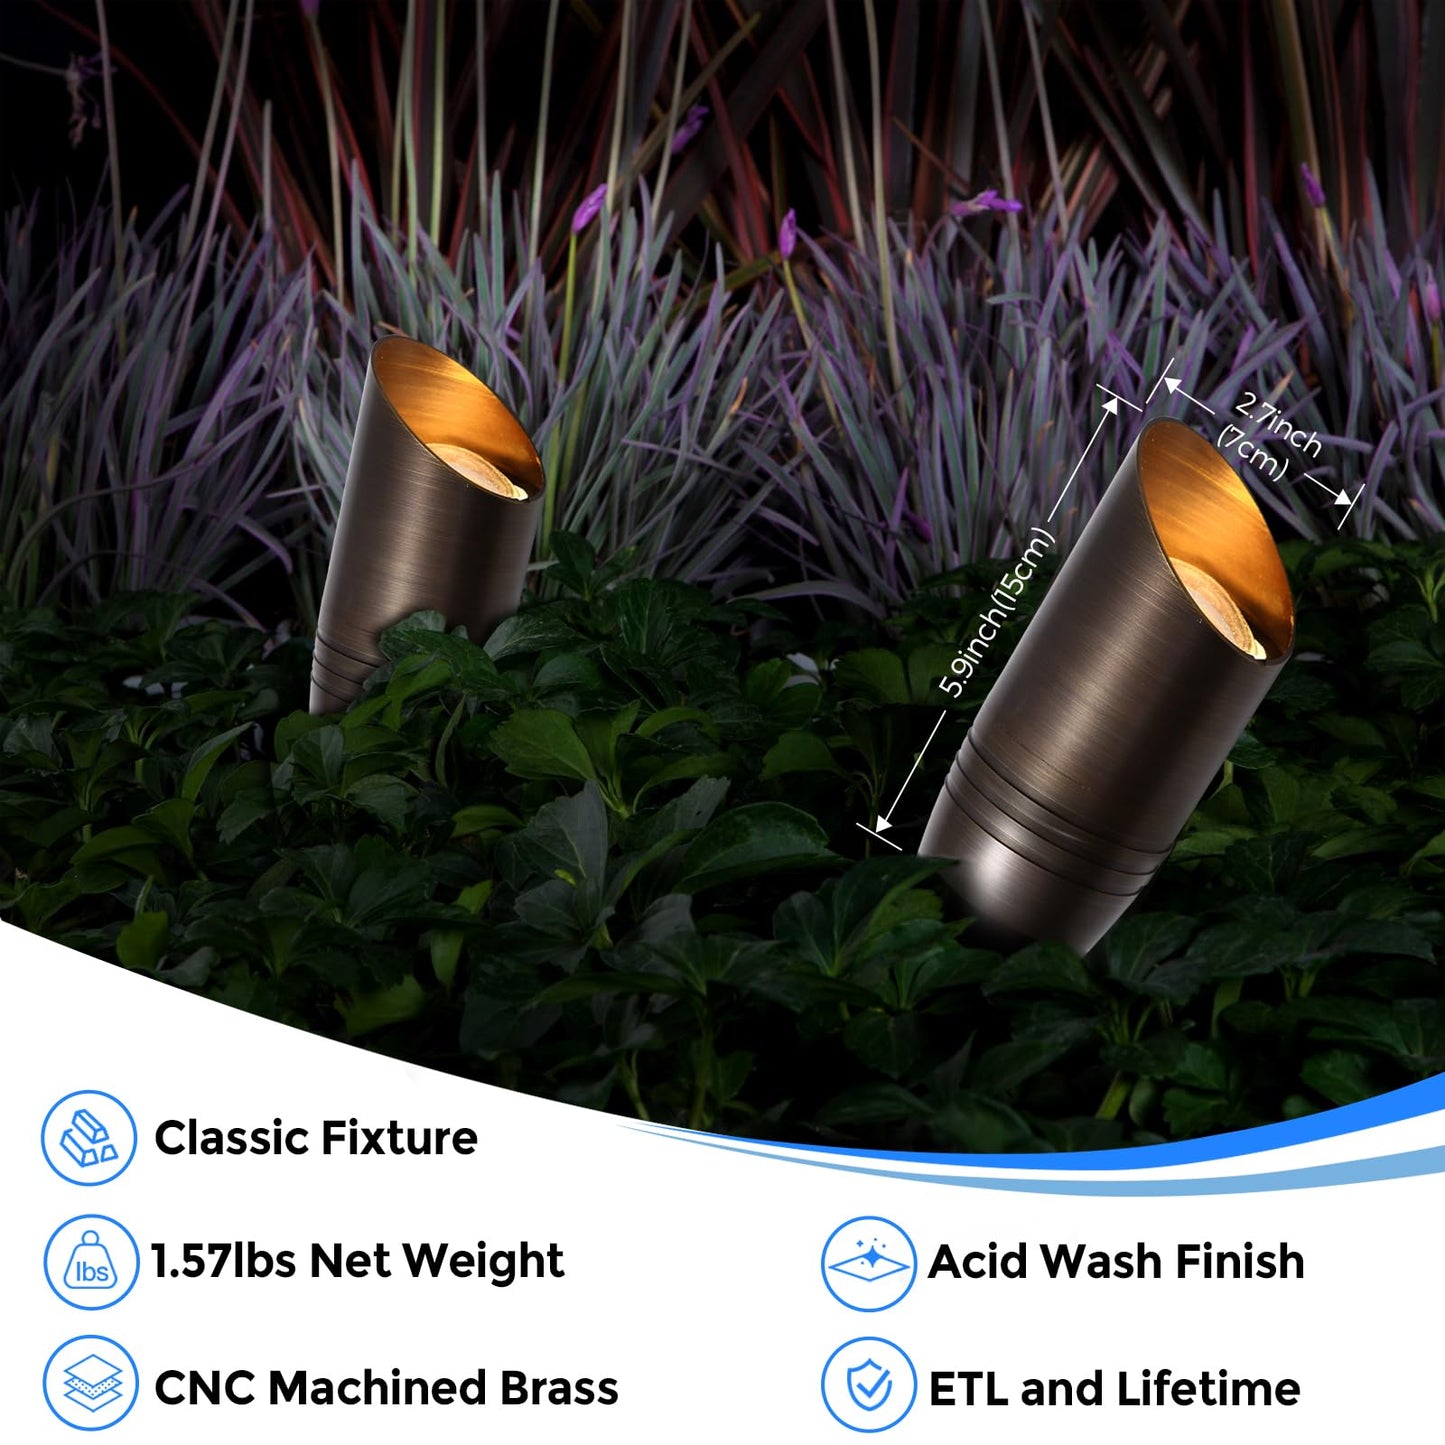 Gardencoin Solid Brass Landscape Spotlights, Heavy Duty 12V Outdoor LED Low Voltage Landscape Lighting, Bronze Yard Directional Uplights, Waterproof Landscape Fixture Without Bulb (Classic, 6pack)